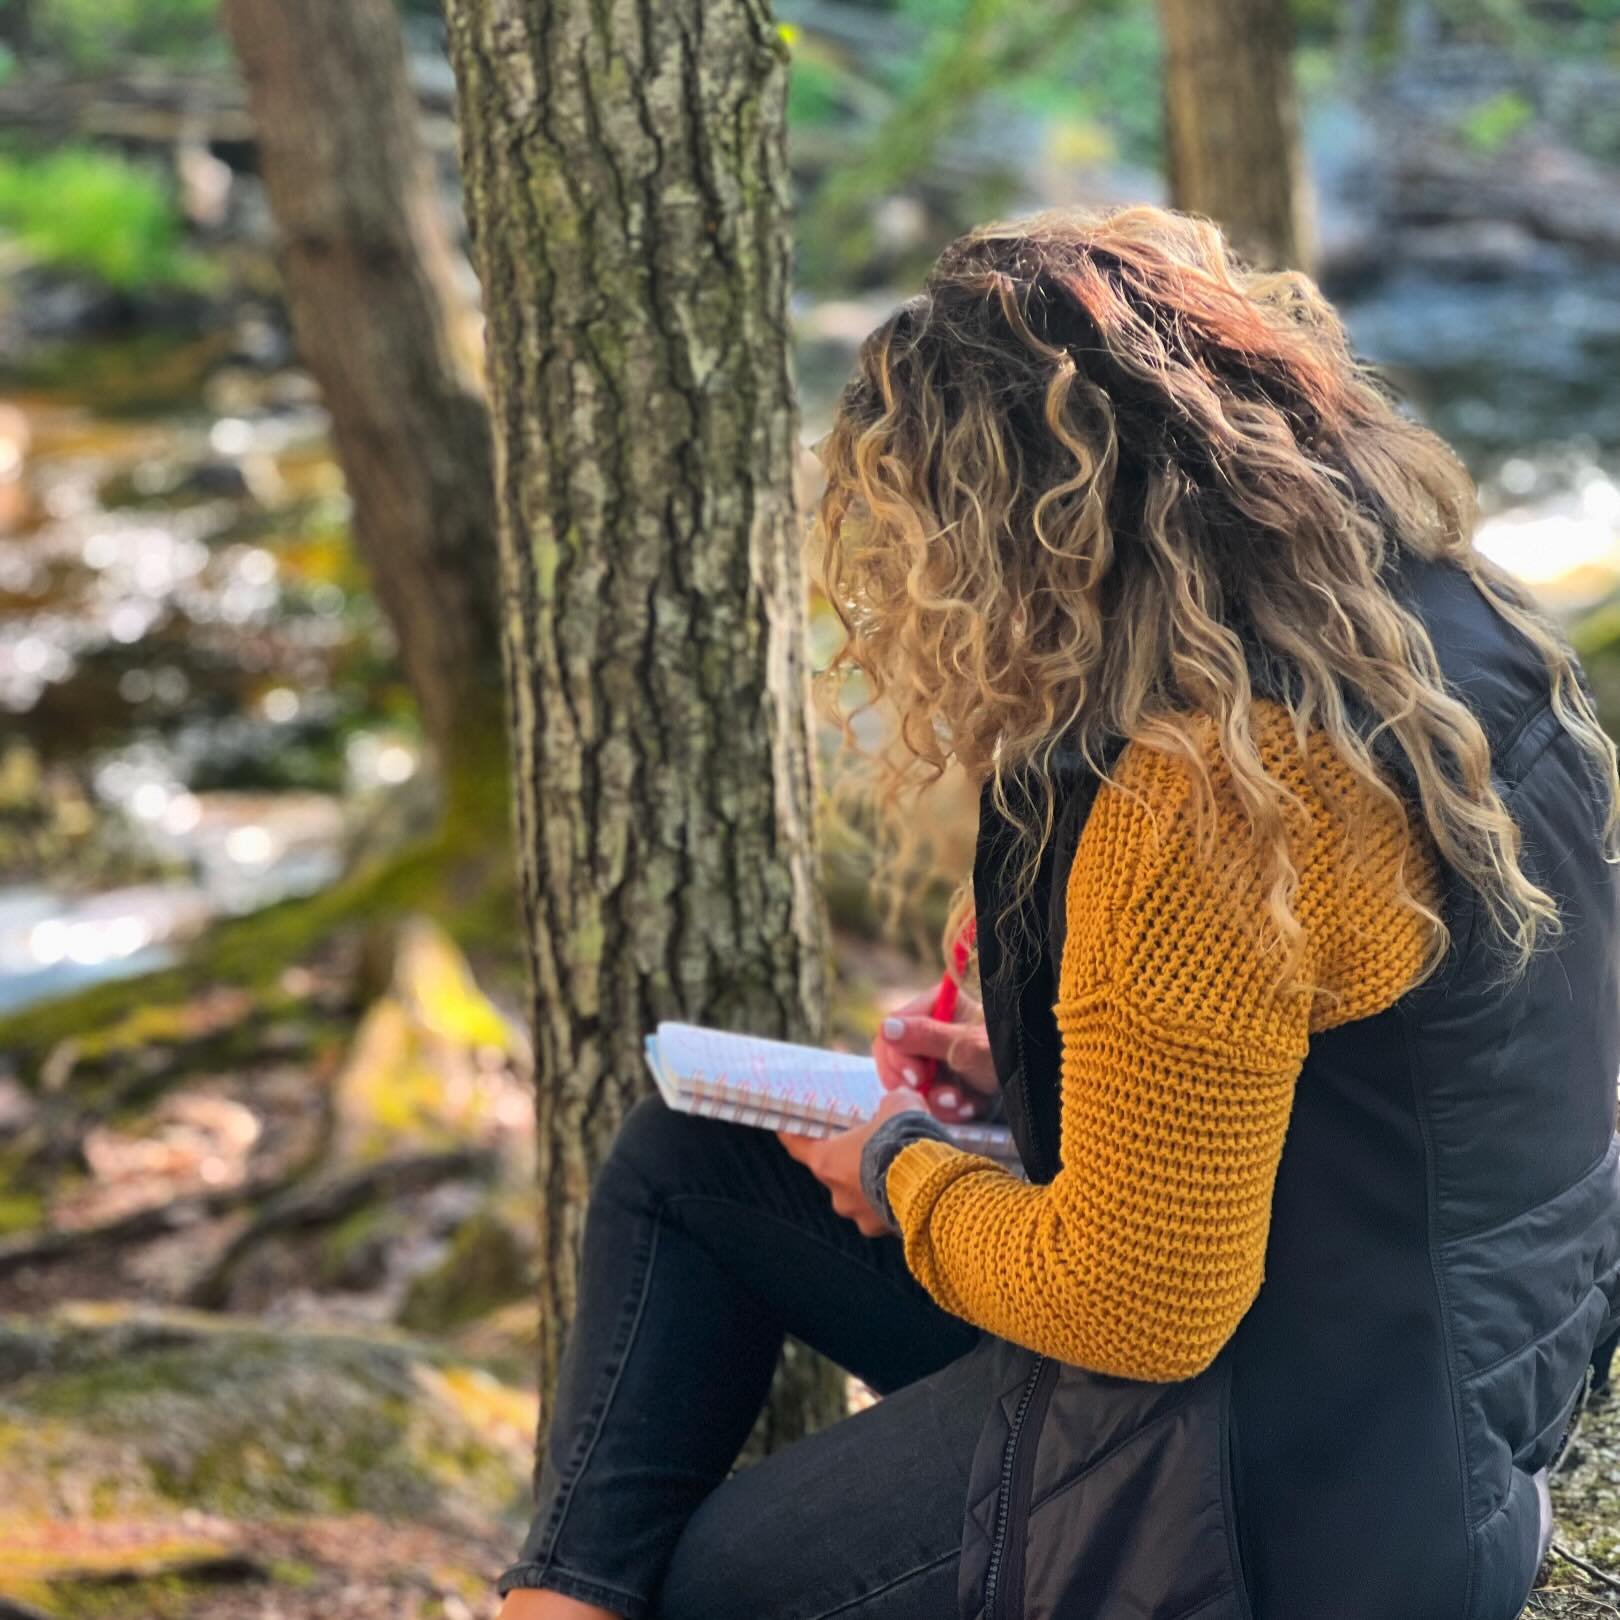 We love this stunning snapshot from one of our past retreat participants! After a serene walking meditation by the river, she found a moment of stillness to journal. ✨ 

How often do we pause in our busy lives to truly connect with ourselves? Our ret